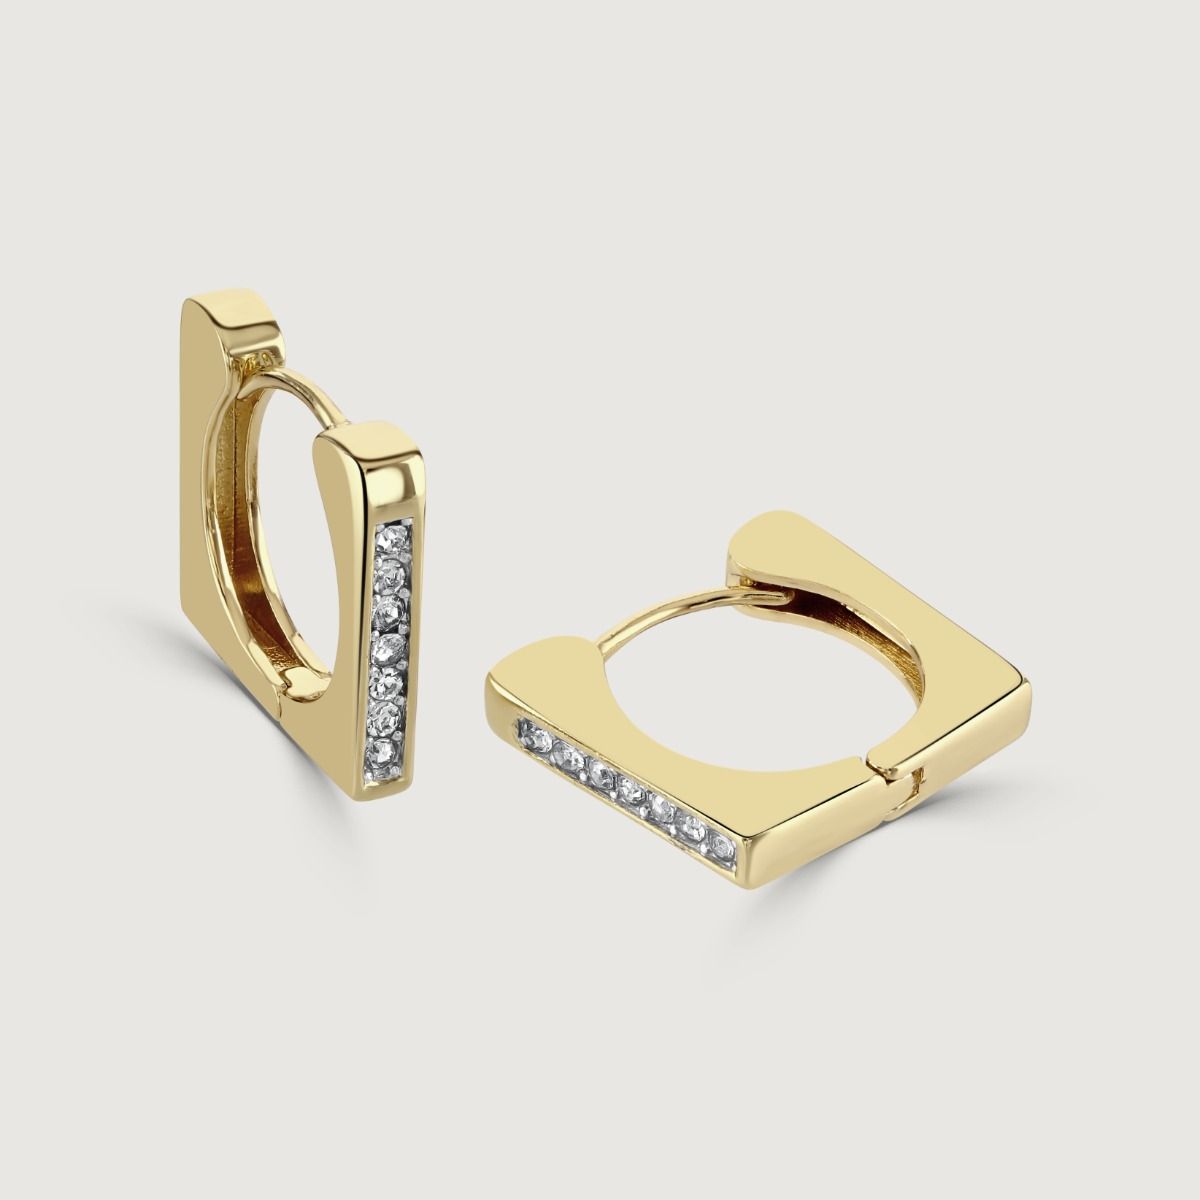 The Square Crystal Huggie Earrings are dazzling accessories that effortlessly combine elegance and sparkle. With their square shape and embedded crystals, these huggie earrings exude a sophisticated charm. 